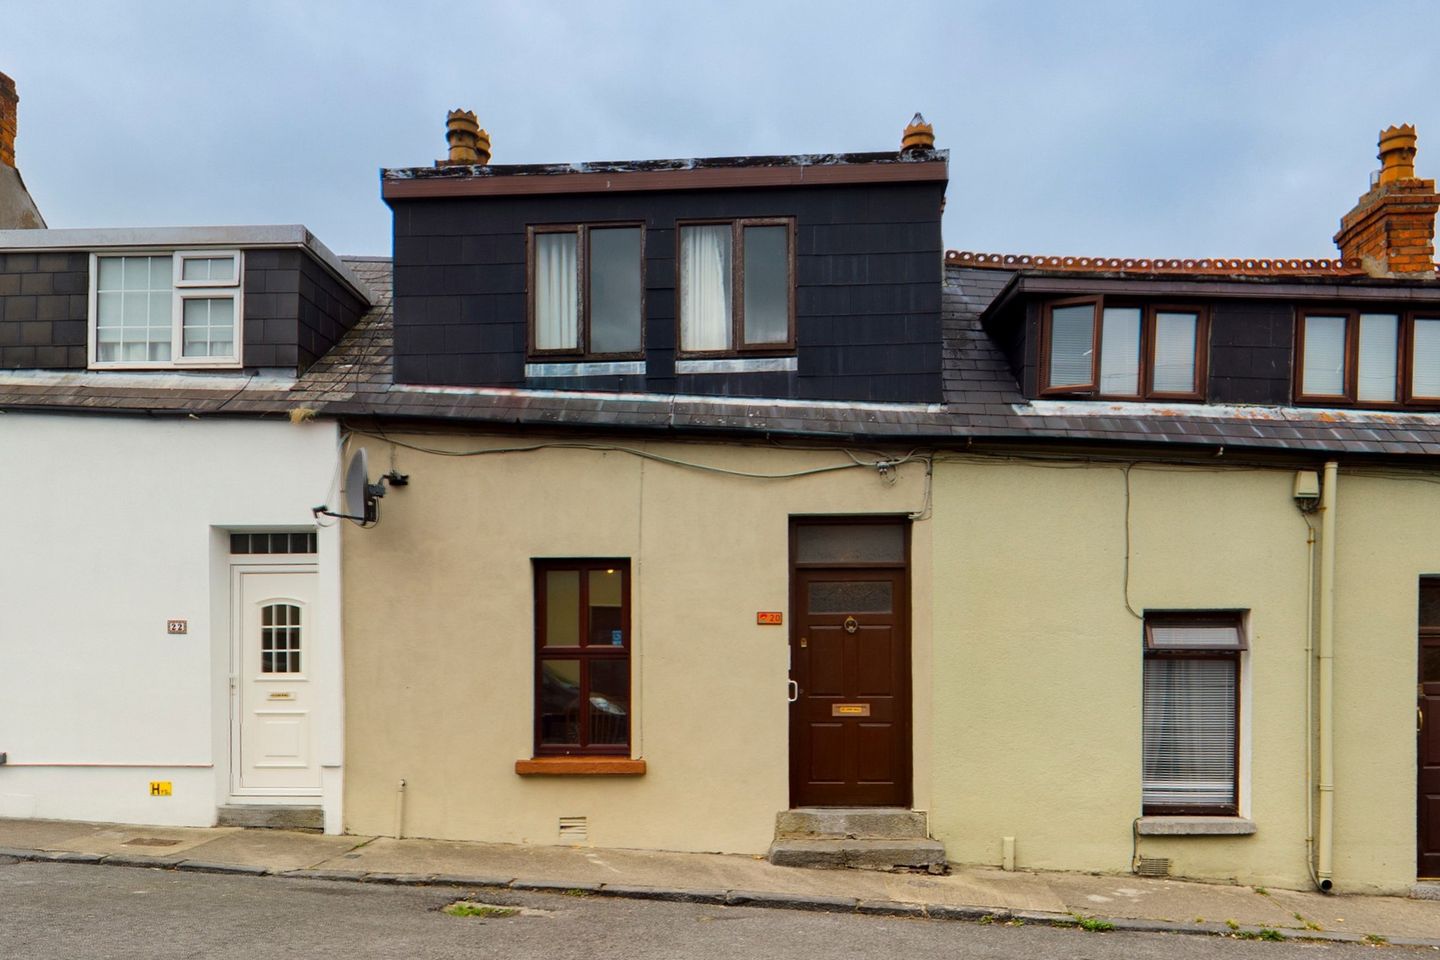 20 Saint Alphonsus Road, Waterford City, Co. Waterford